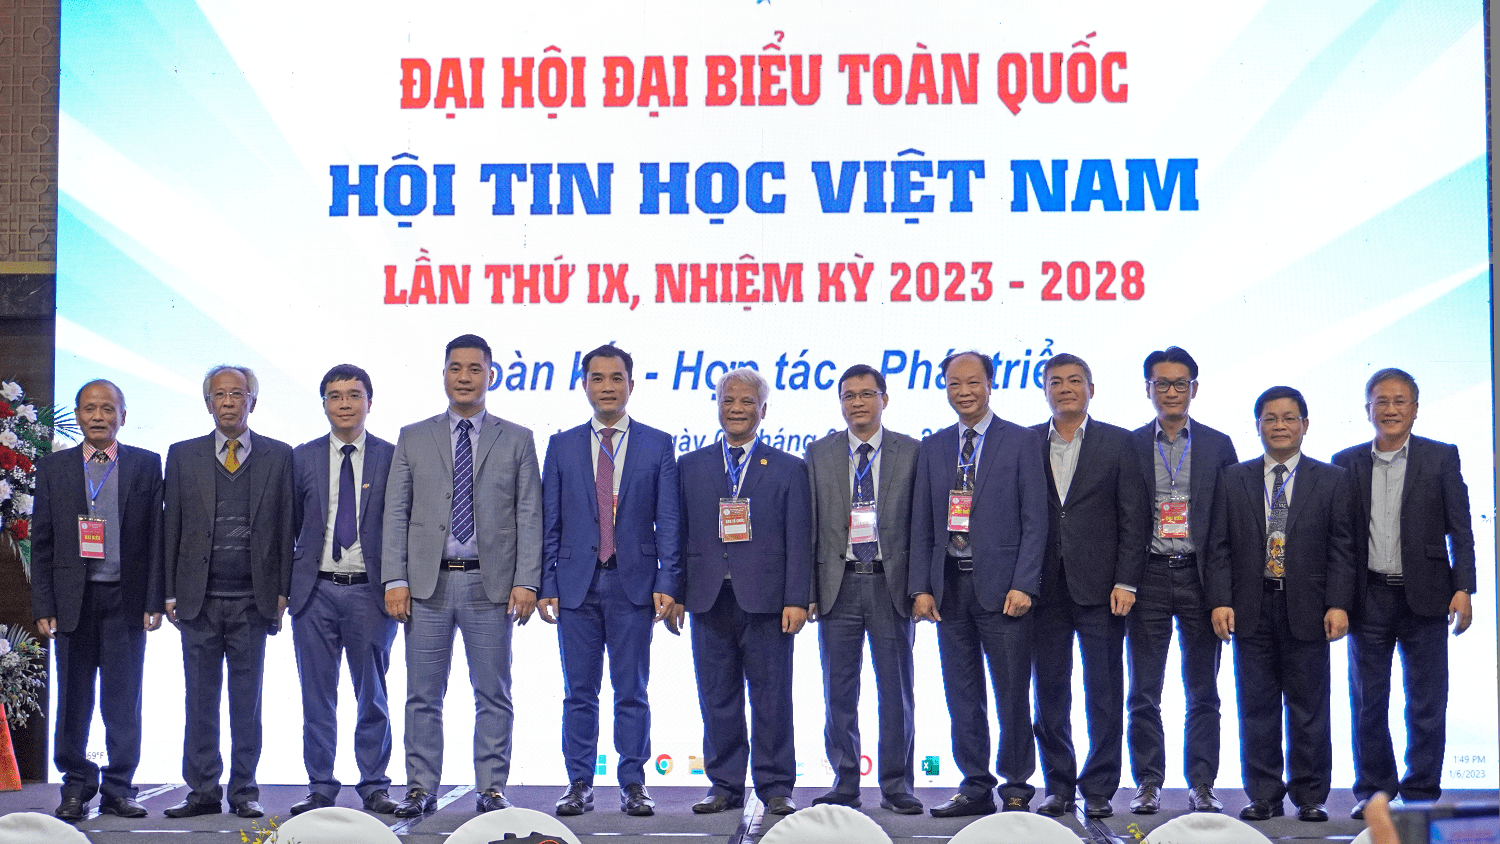 Mr. Nguyen Hoang Minh - CEO of FPT IS (the third one on the left-hand side of the picture) - was elected Vice President of VAIP for the 2023 - 2028 term.